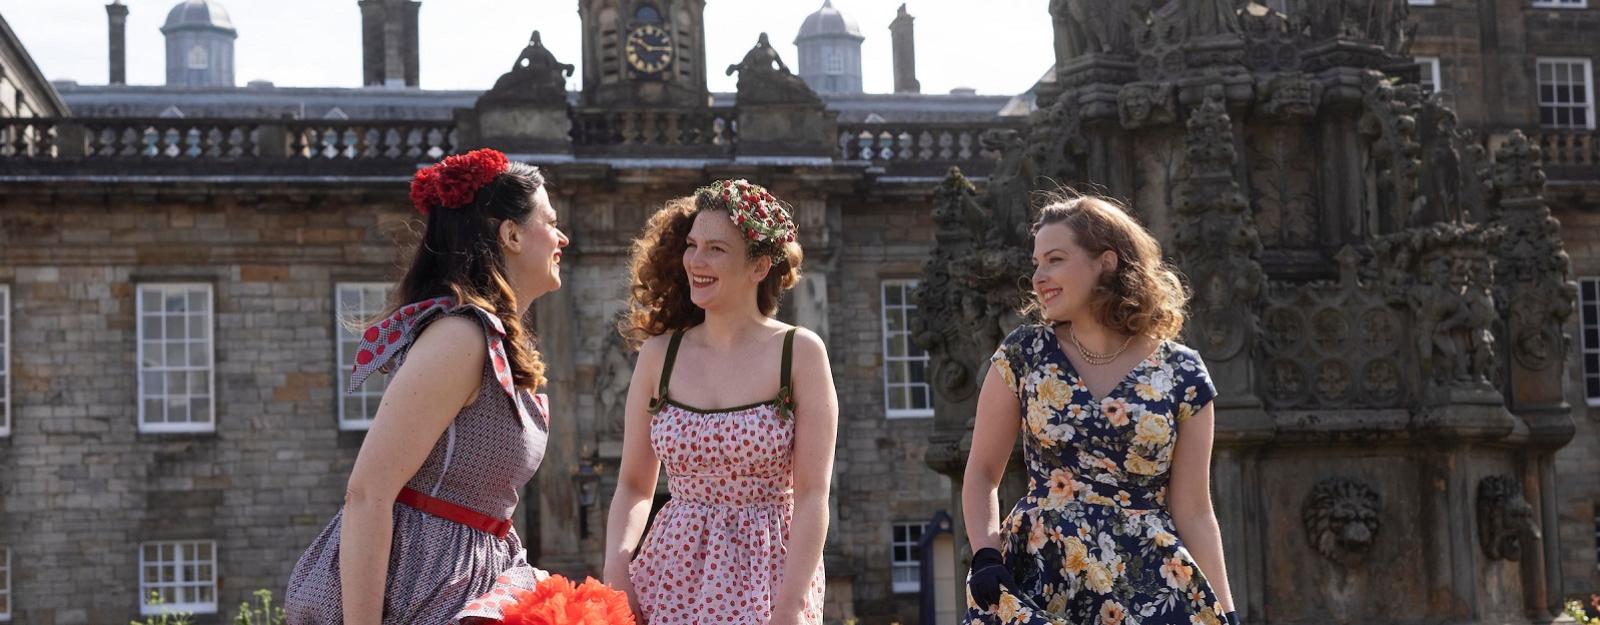 Visitors in 1950s clothing at the Palace of Holyroodhouse